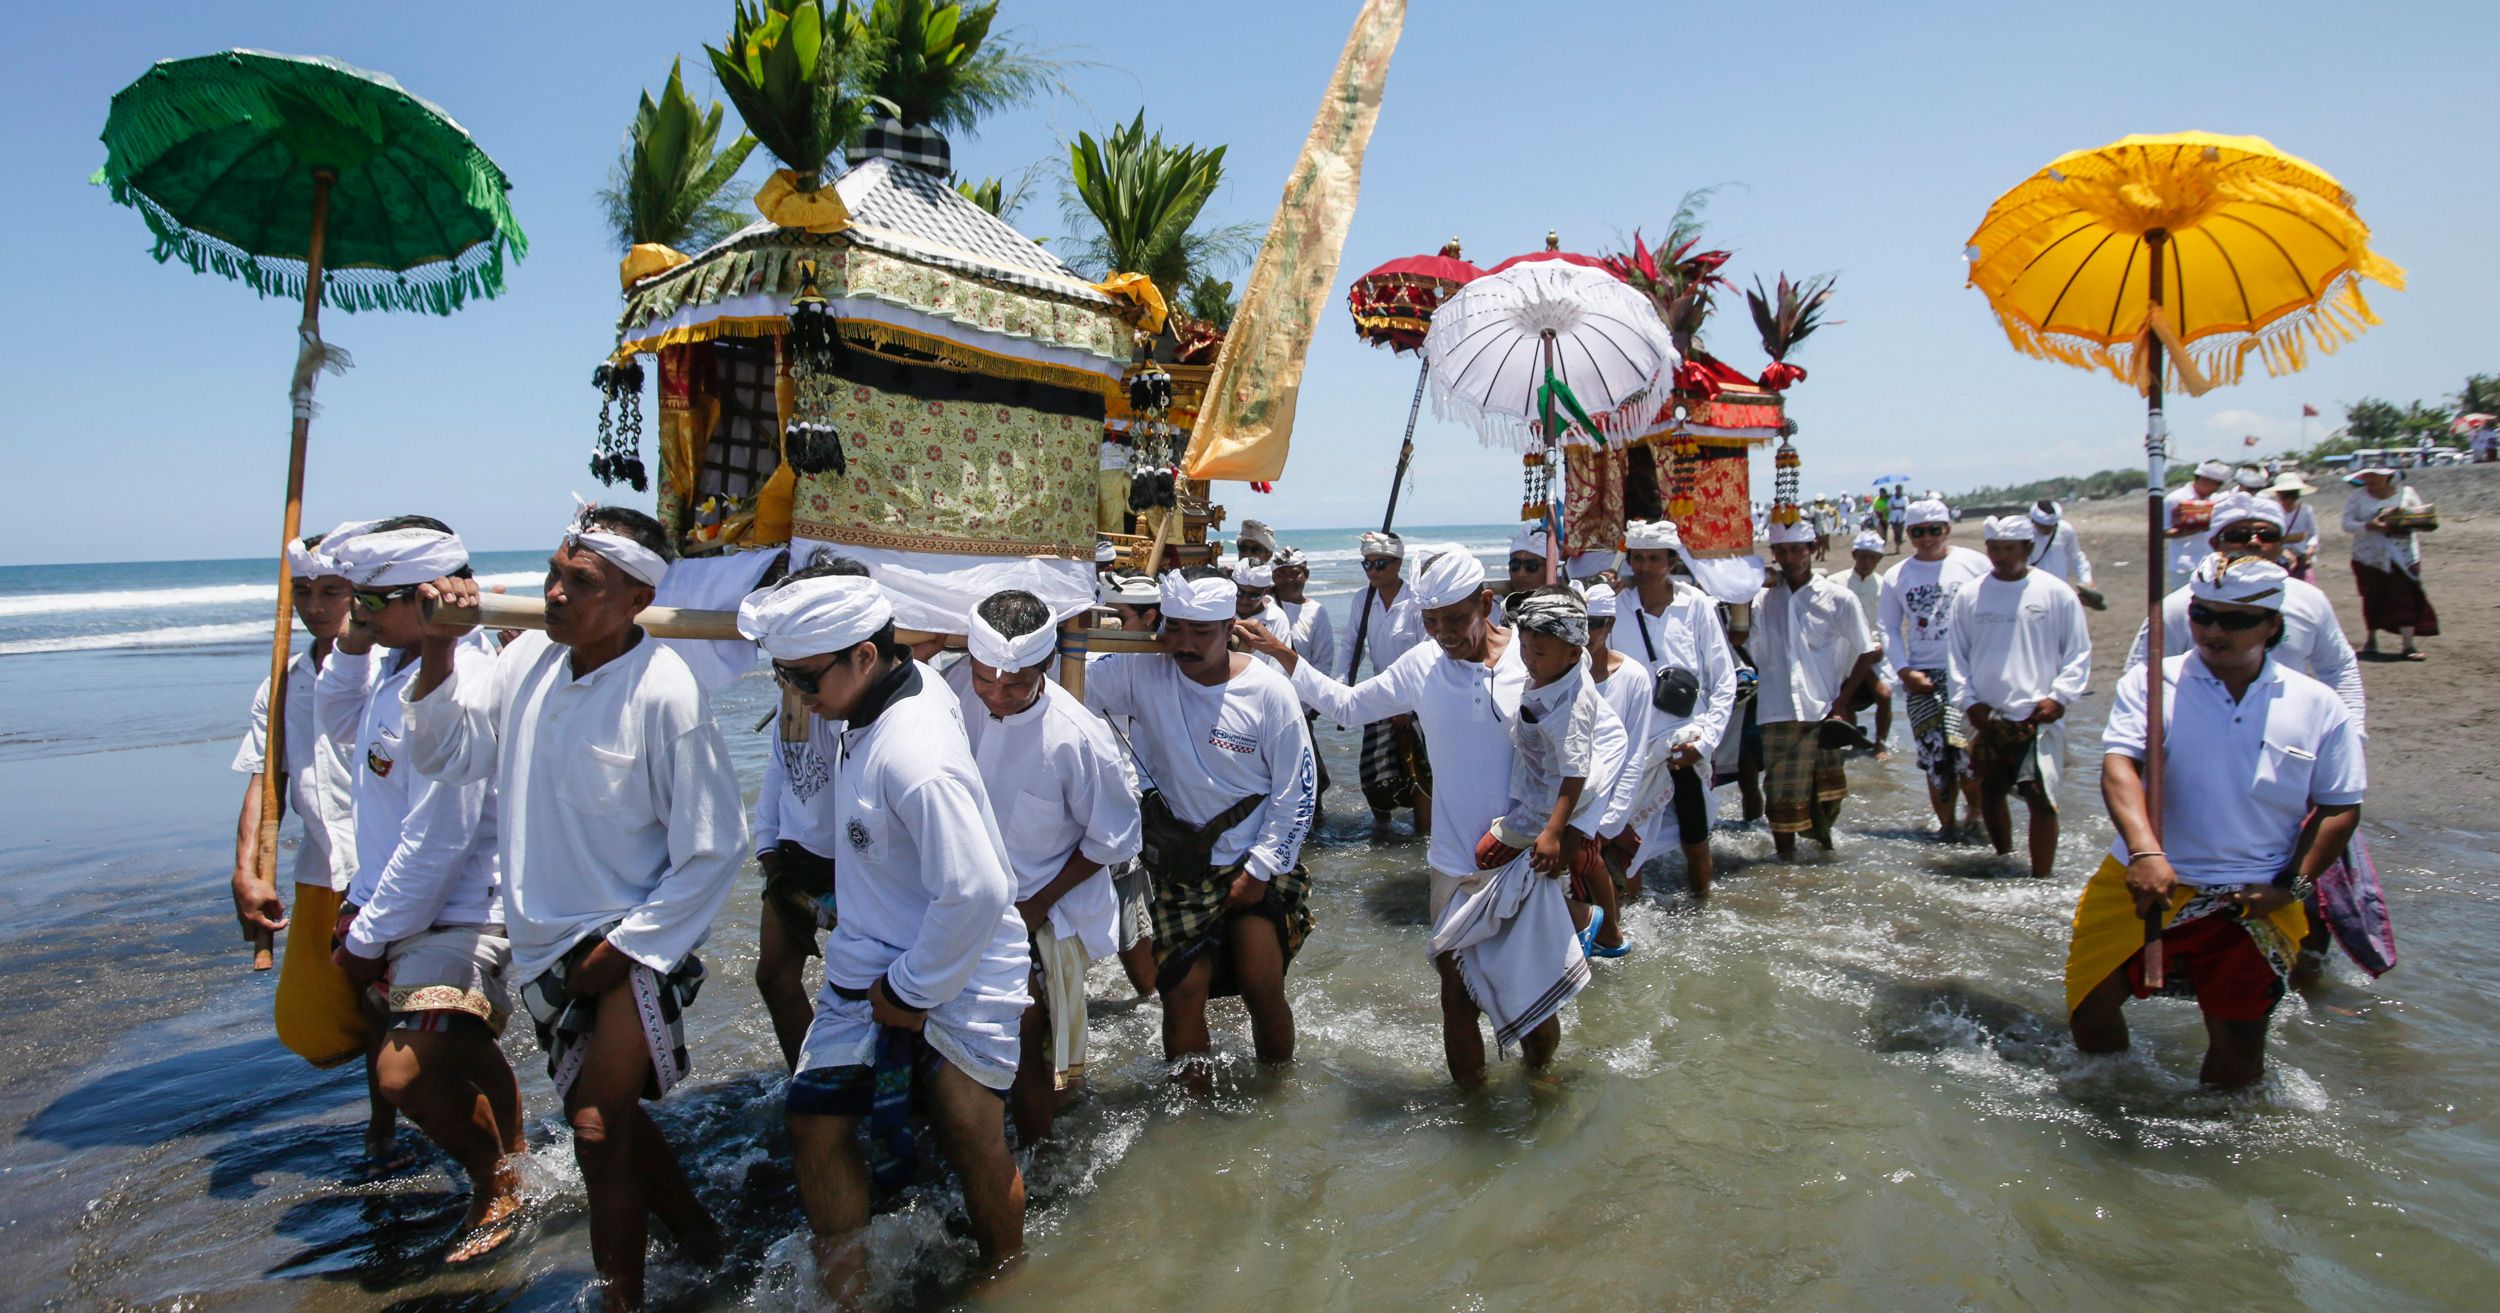 Melasti, a purifying ritual practiced by Balinese Hindus, is one of many ceremonies that rely on the power of the sacred sea. Photo by Made Nagi/epa/Corbis